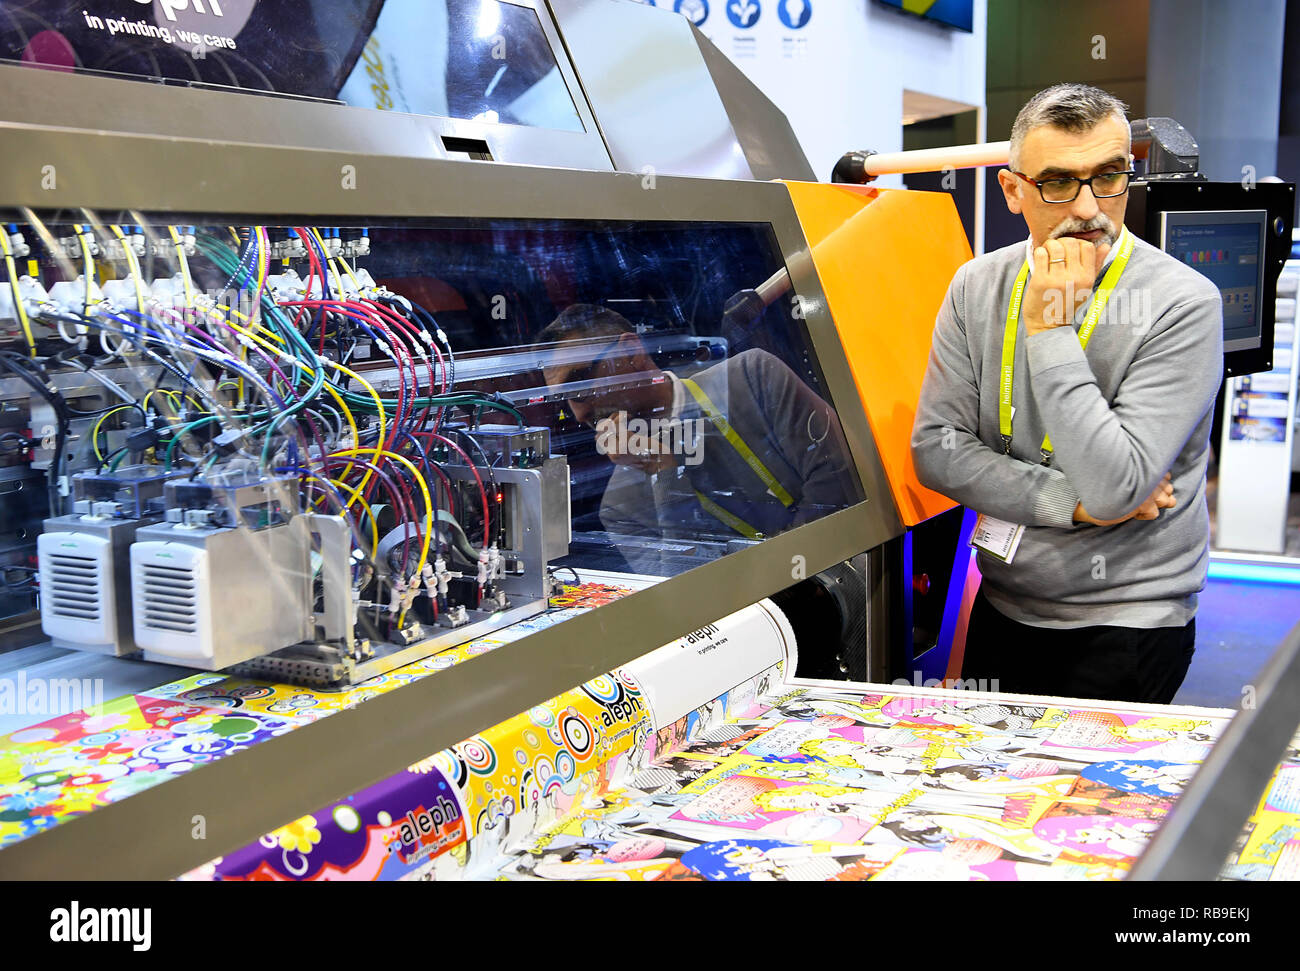 Frankfurt, Germany. 8th Jan, 2019. An exhibitor stands next to a digital printer for textiles during Heimtextil in Frankfurt, Germany, on Jan. 8, 2019. The World's largest international trade fair for home and contract textiles, namely Heimtextil, kicked off Tuesday in Frankfurt. Credit: Lu Yang/Xinhua/Alamy Live News Stock Photo